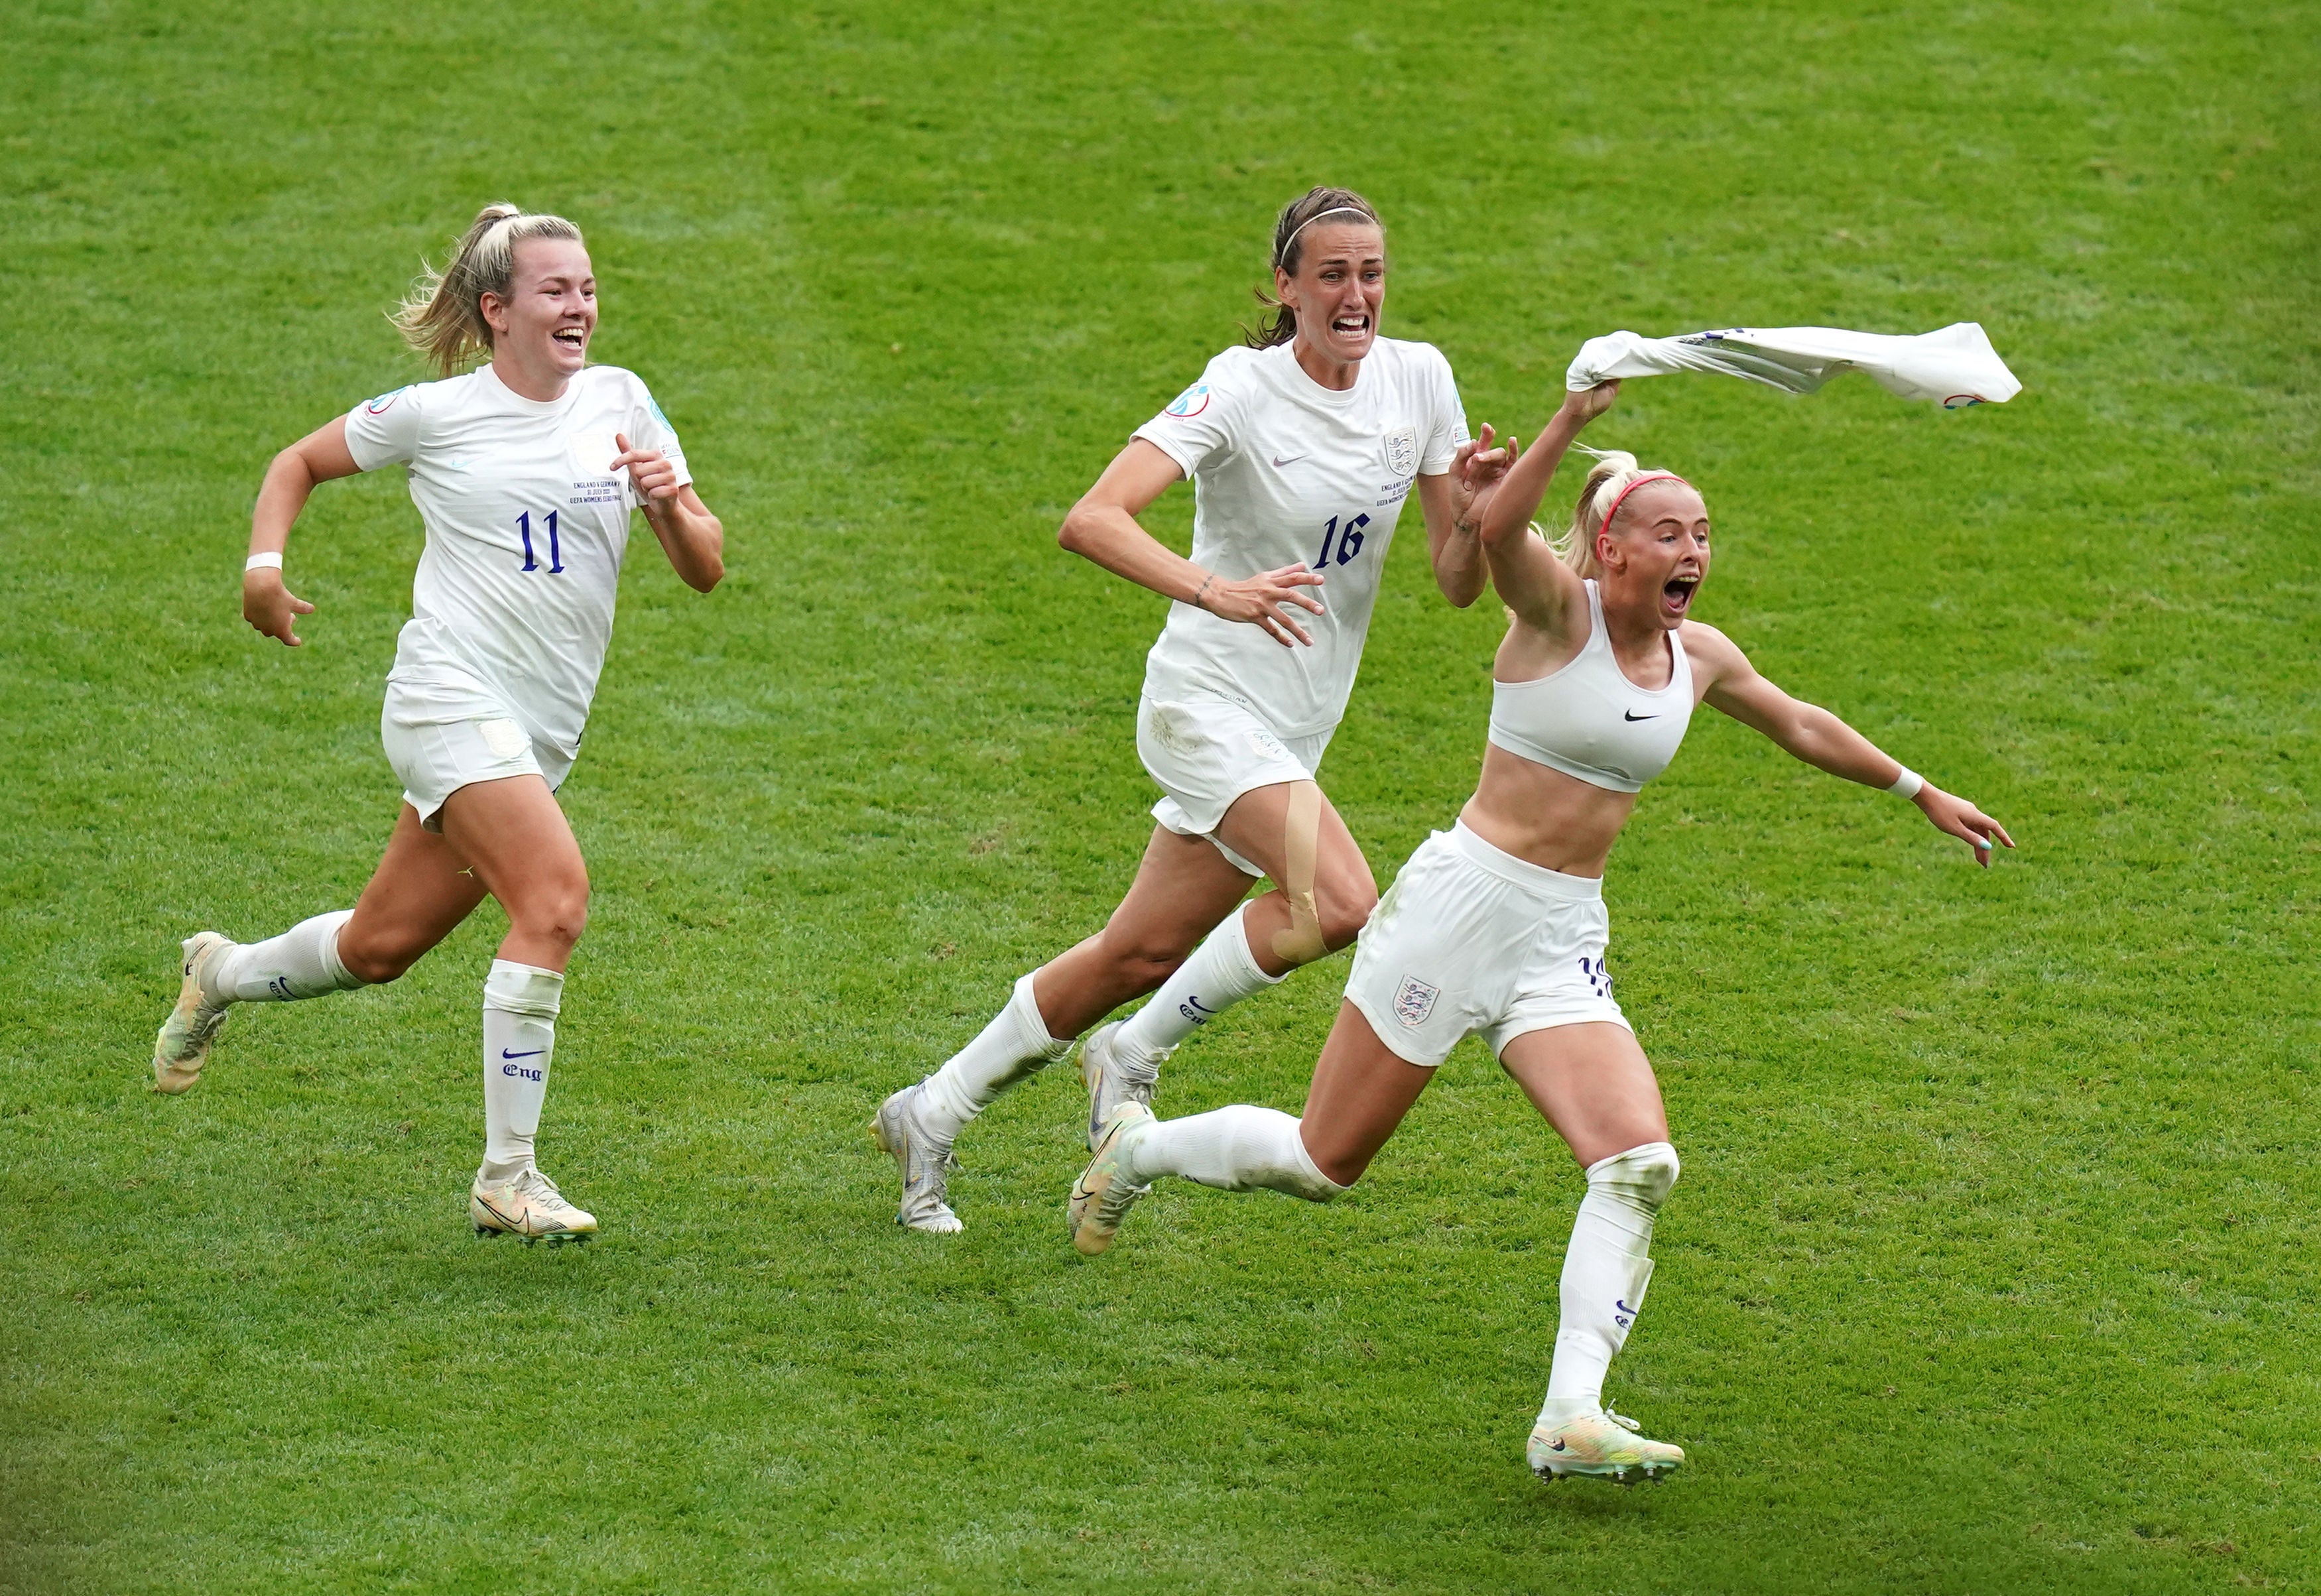 There were no shirt round the head celebrations but Chloe Kelly’s goal was just as important